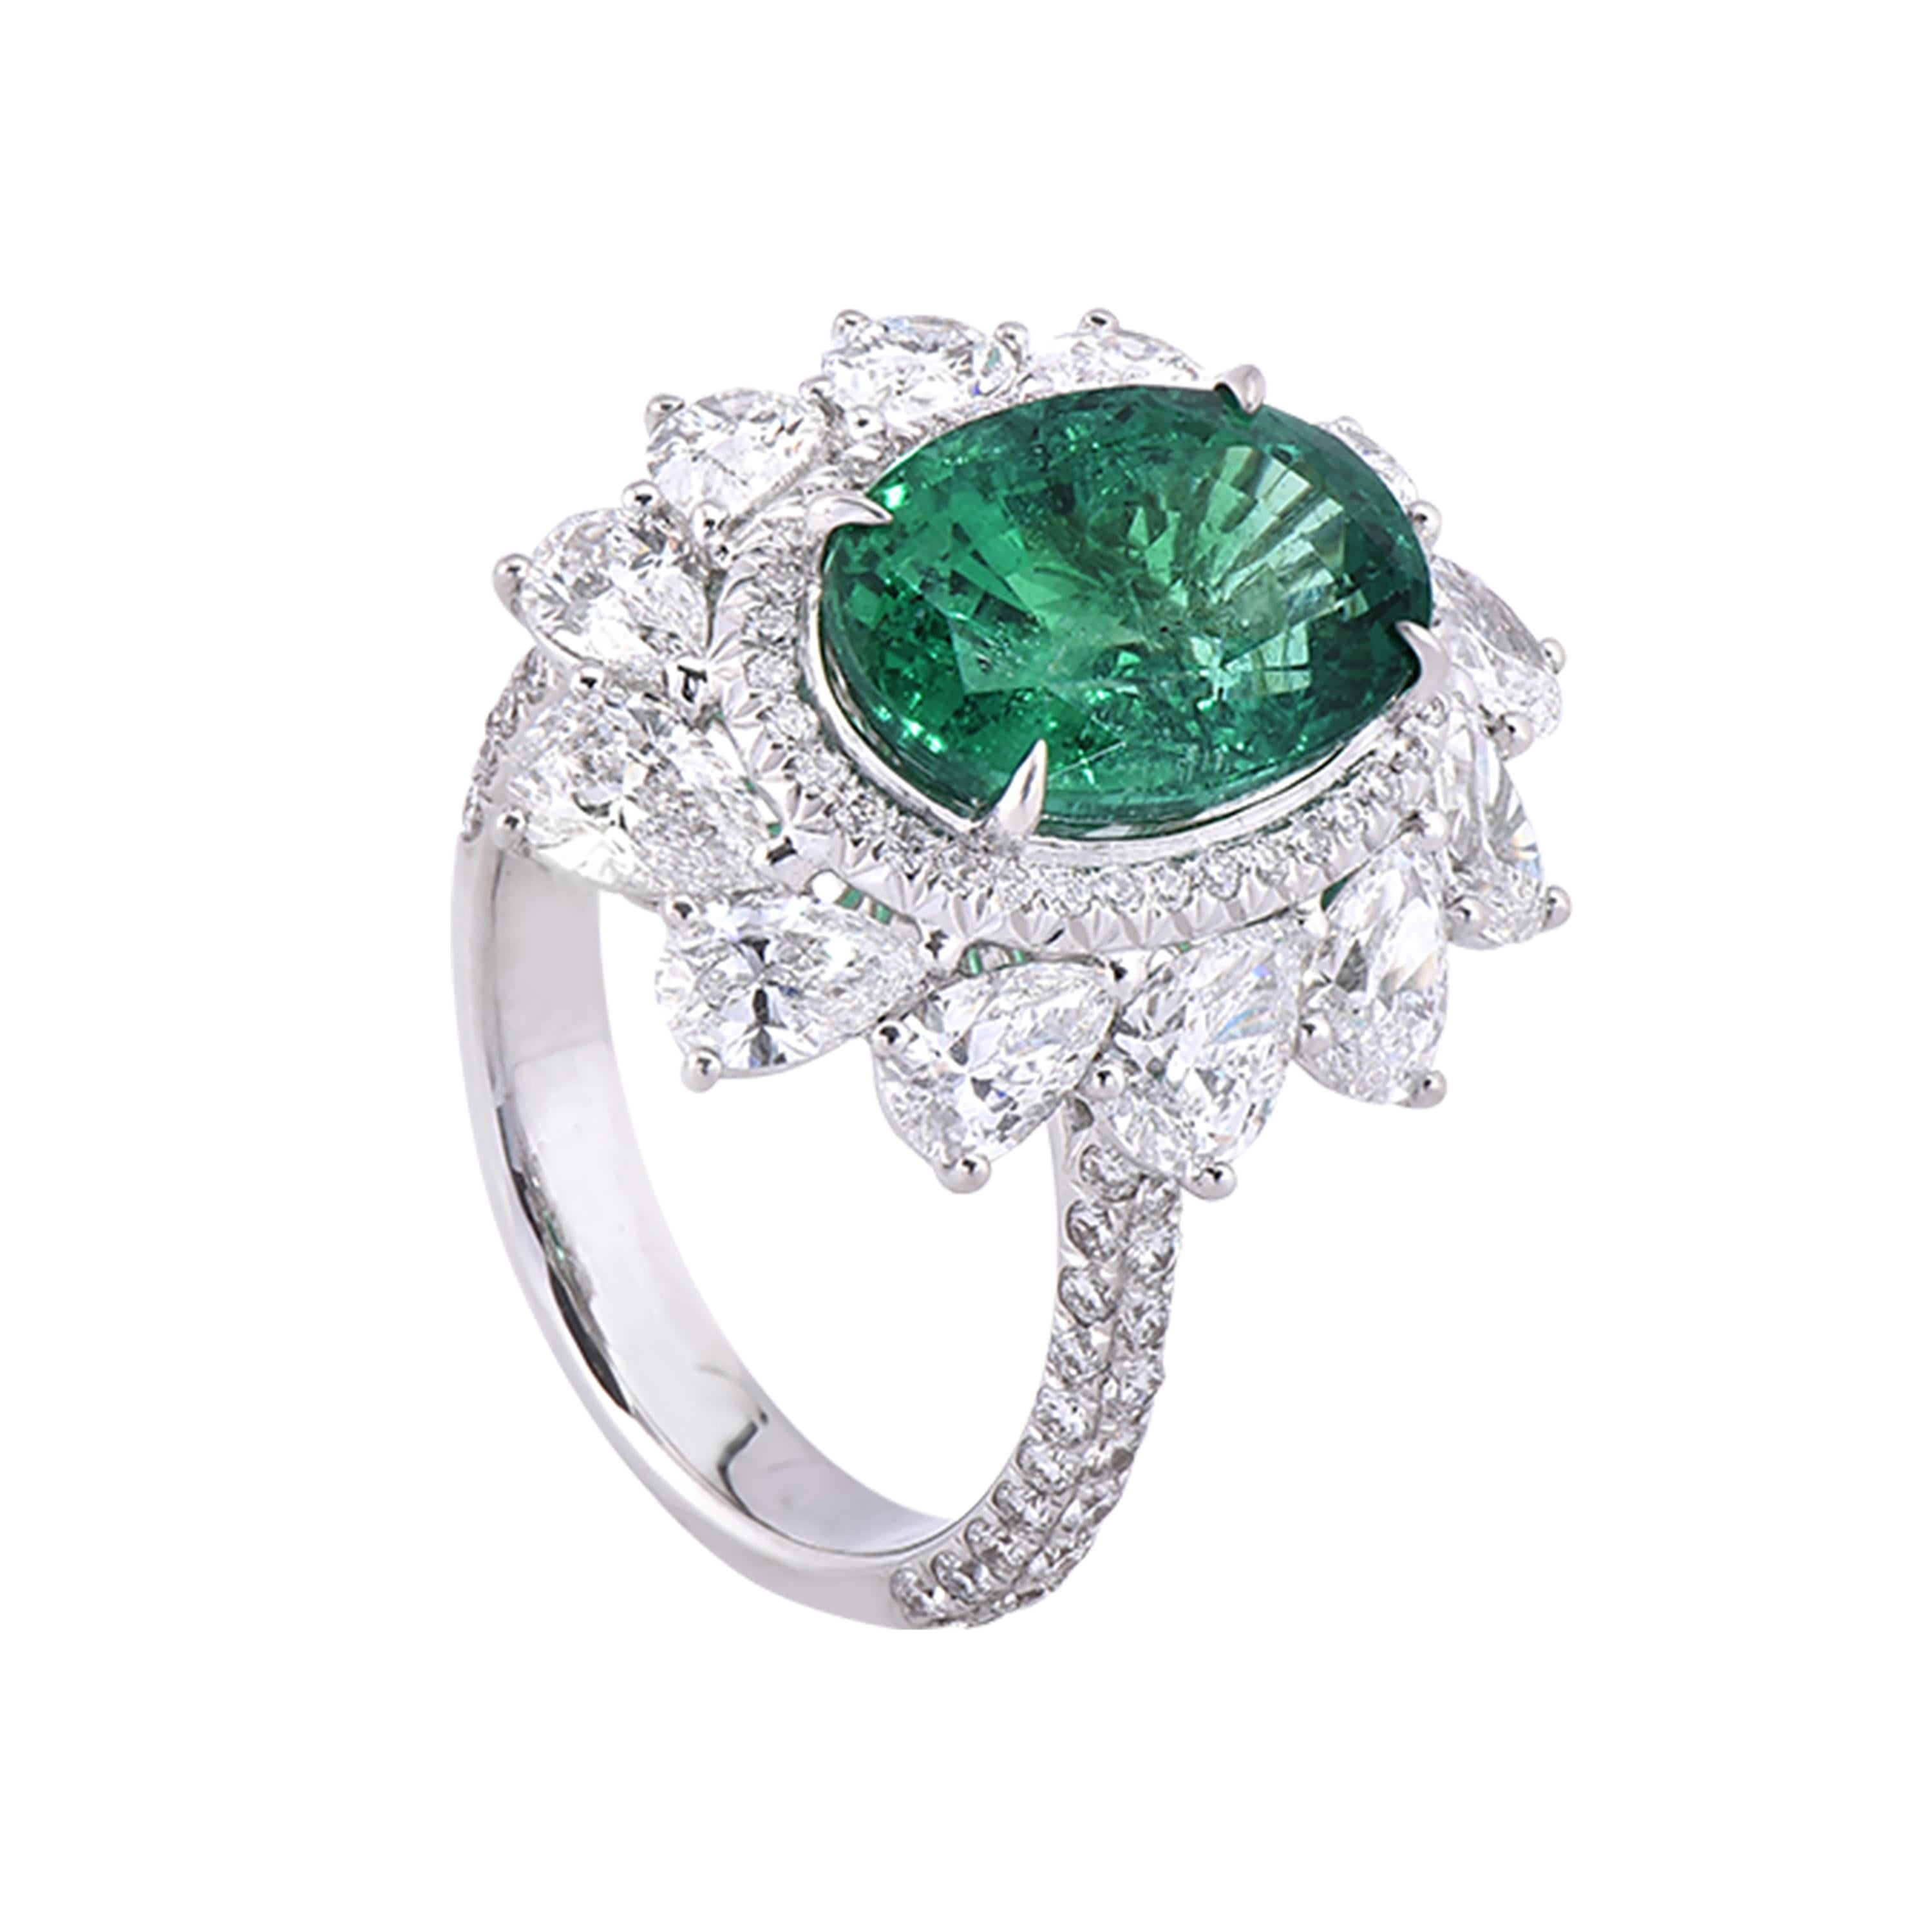 18 karat white gold emerald cocktail ring from the Viridian collection of Laviere. The ring is set with a GIA certified 4.71 carats Zambian oval shape emerald, 2.55 carats brilliant-cut pear shape diamonds and round brilliant diamonds totaling 0.73